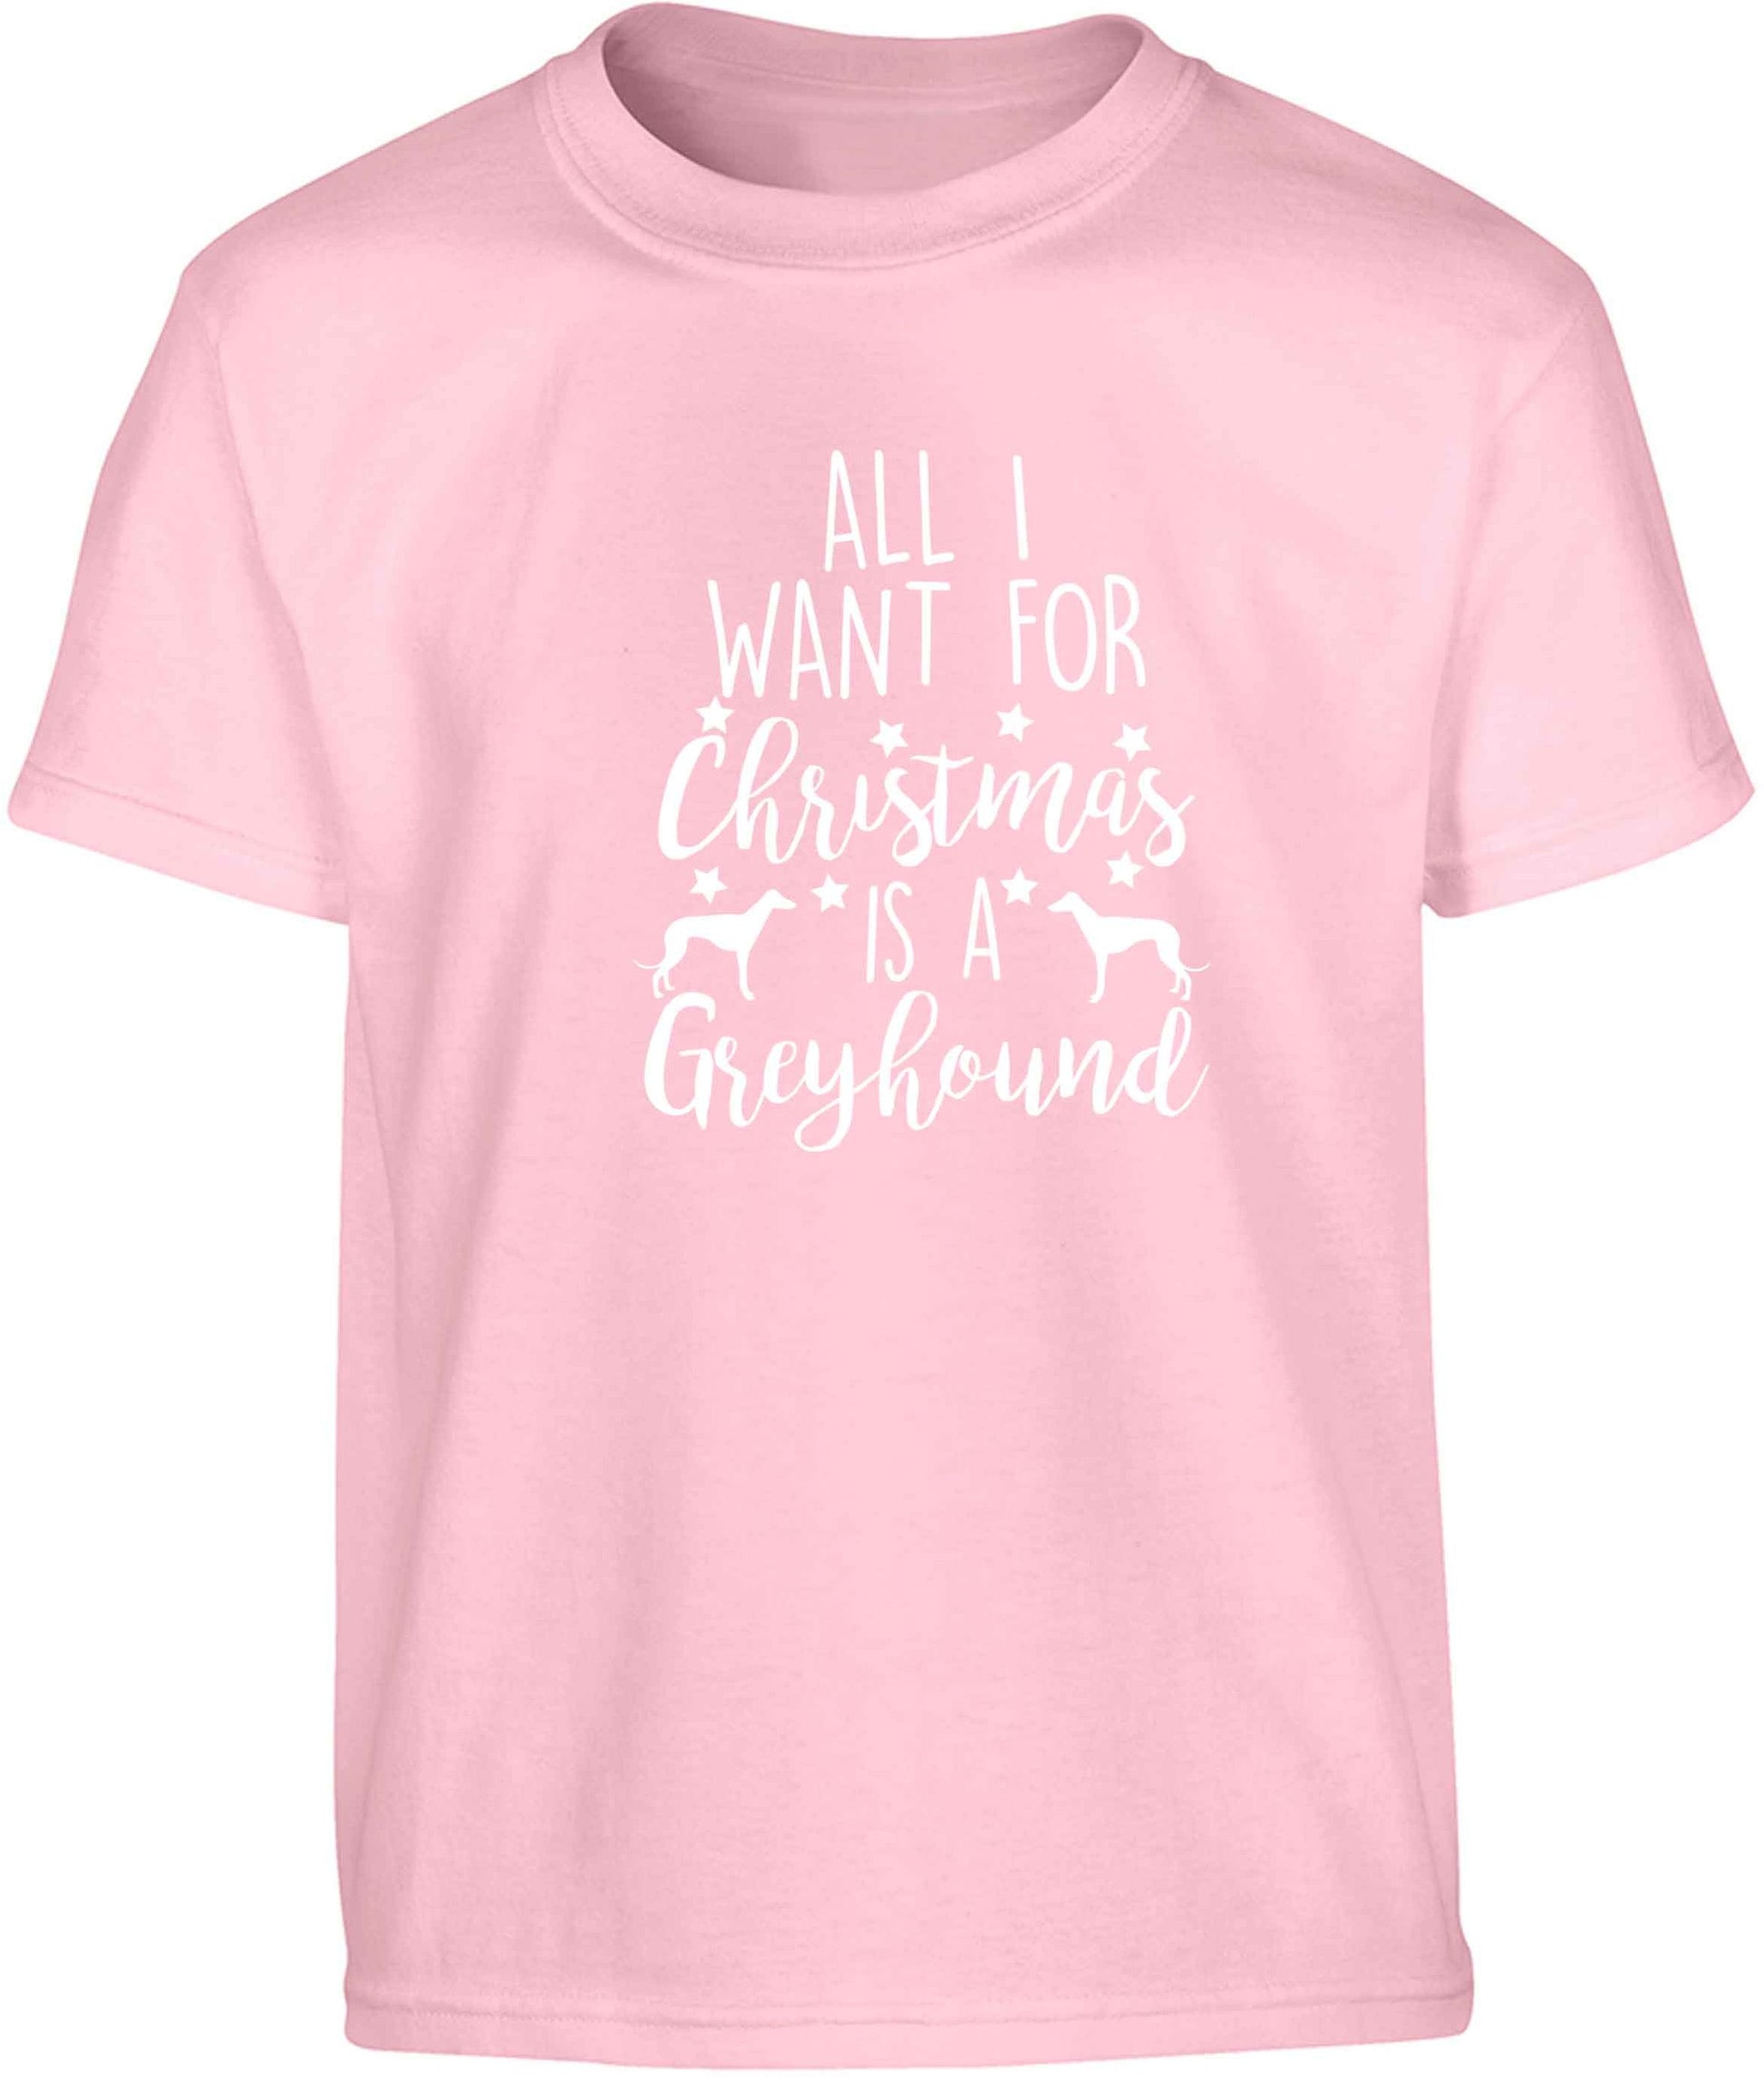 All I want for Christmas is a greyhound Children's light pink Tshirt 12-13 Years